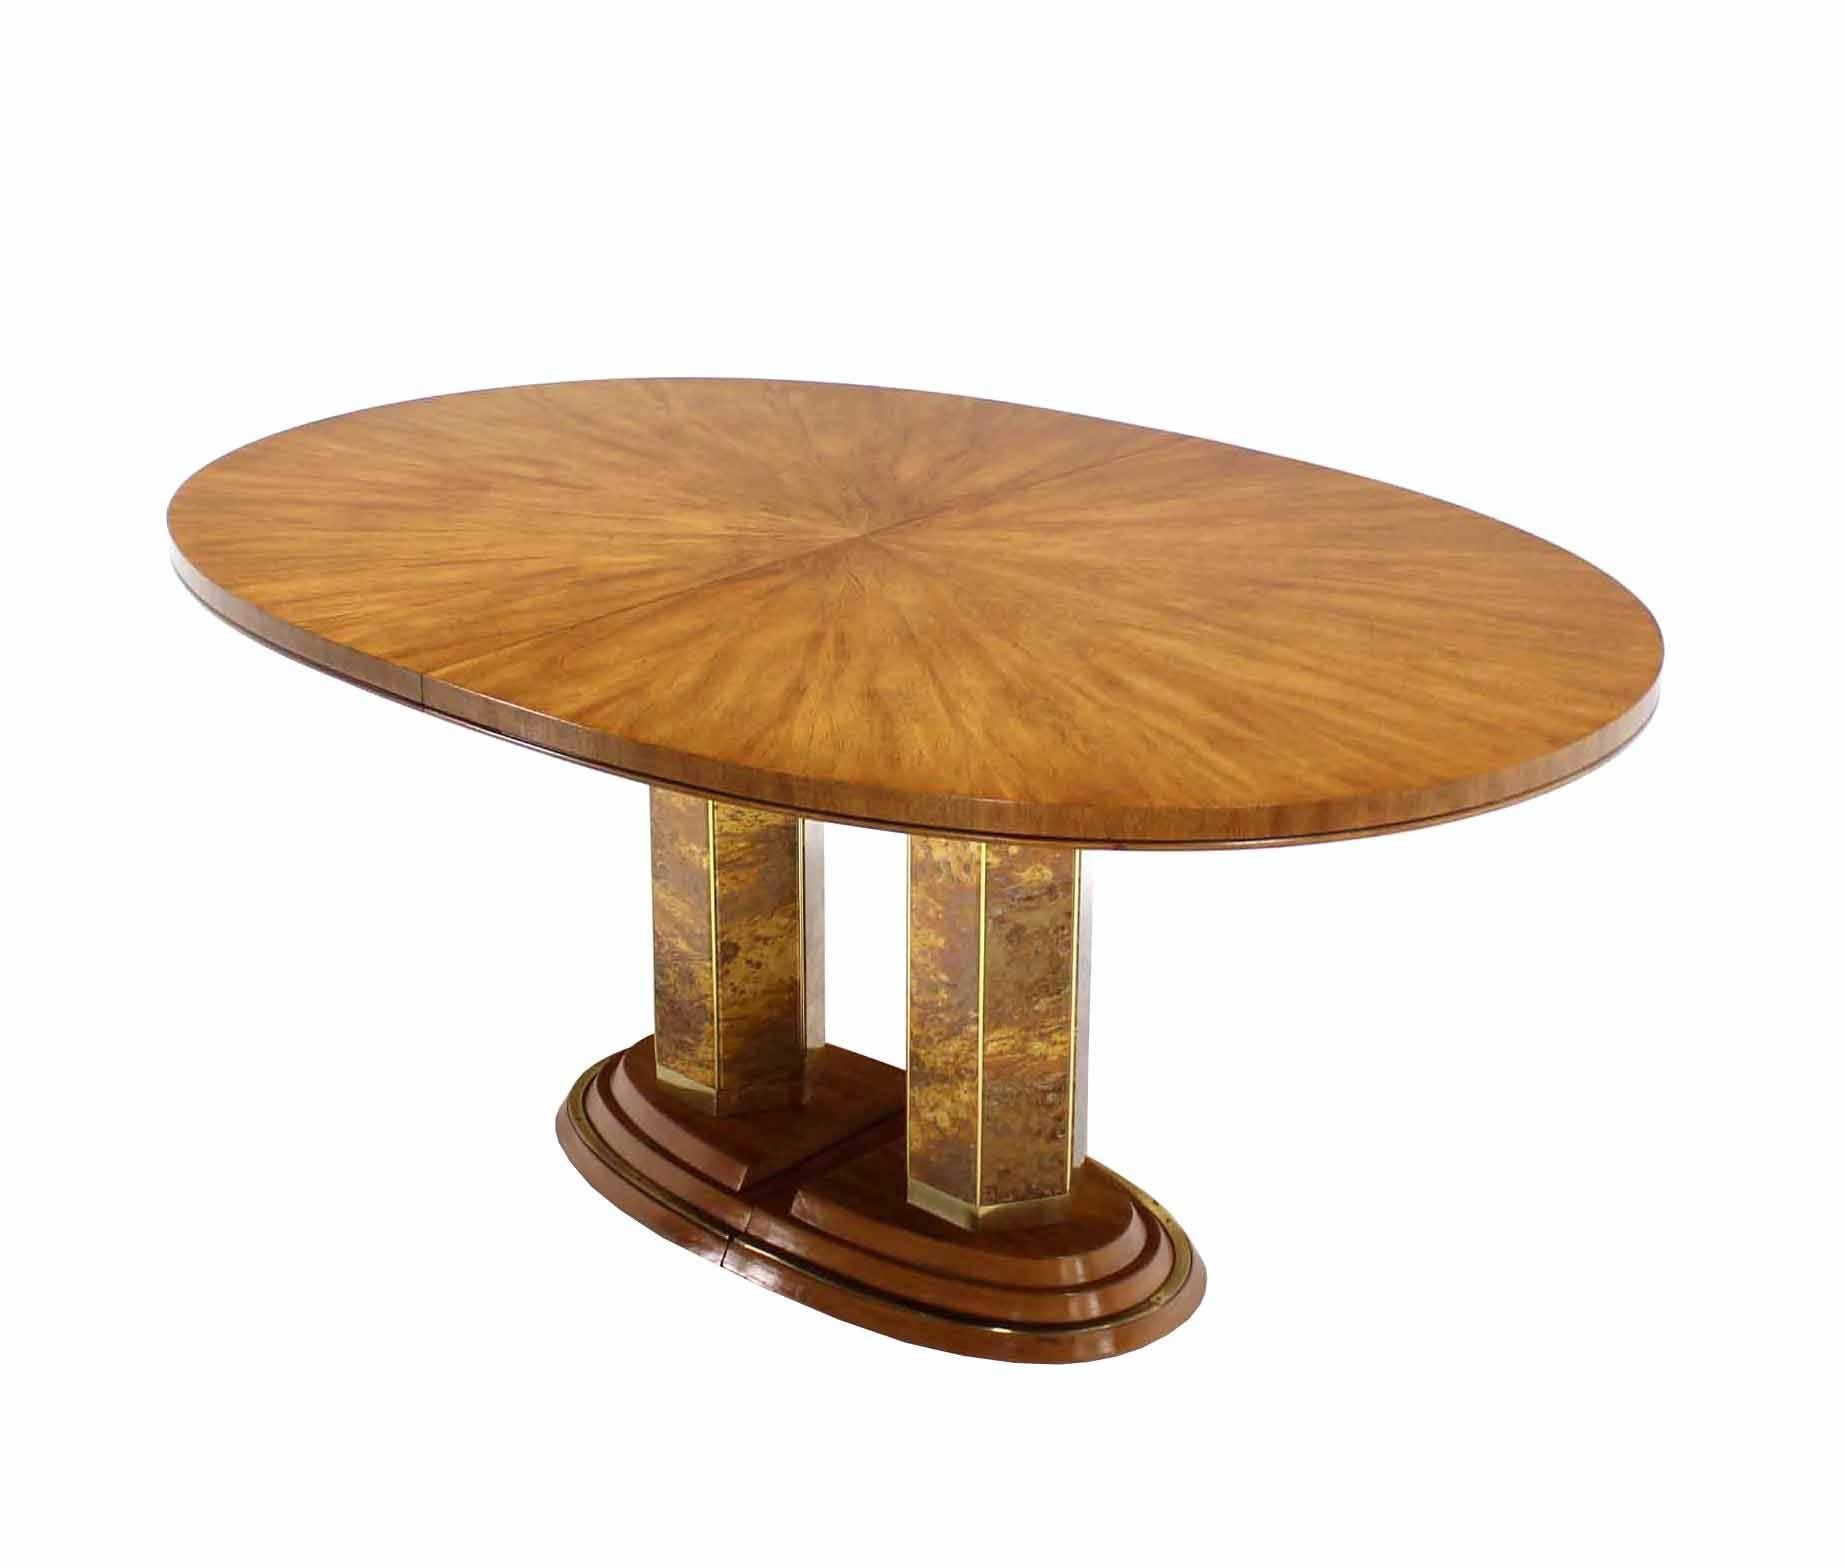 Lacquered Oval Dining Satinwood Table by Drexel w/ Two Extension Boards Leafs